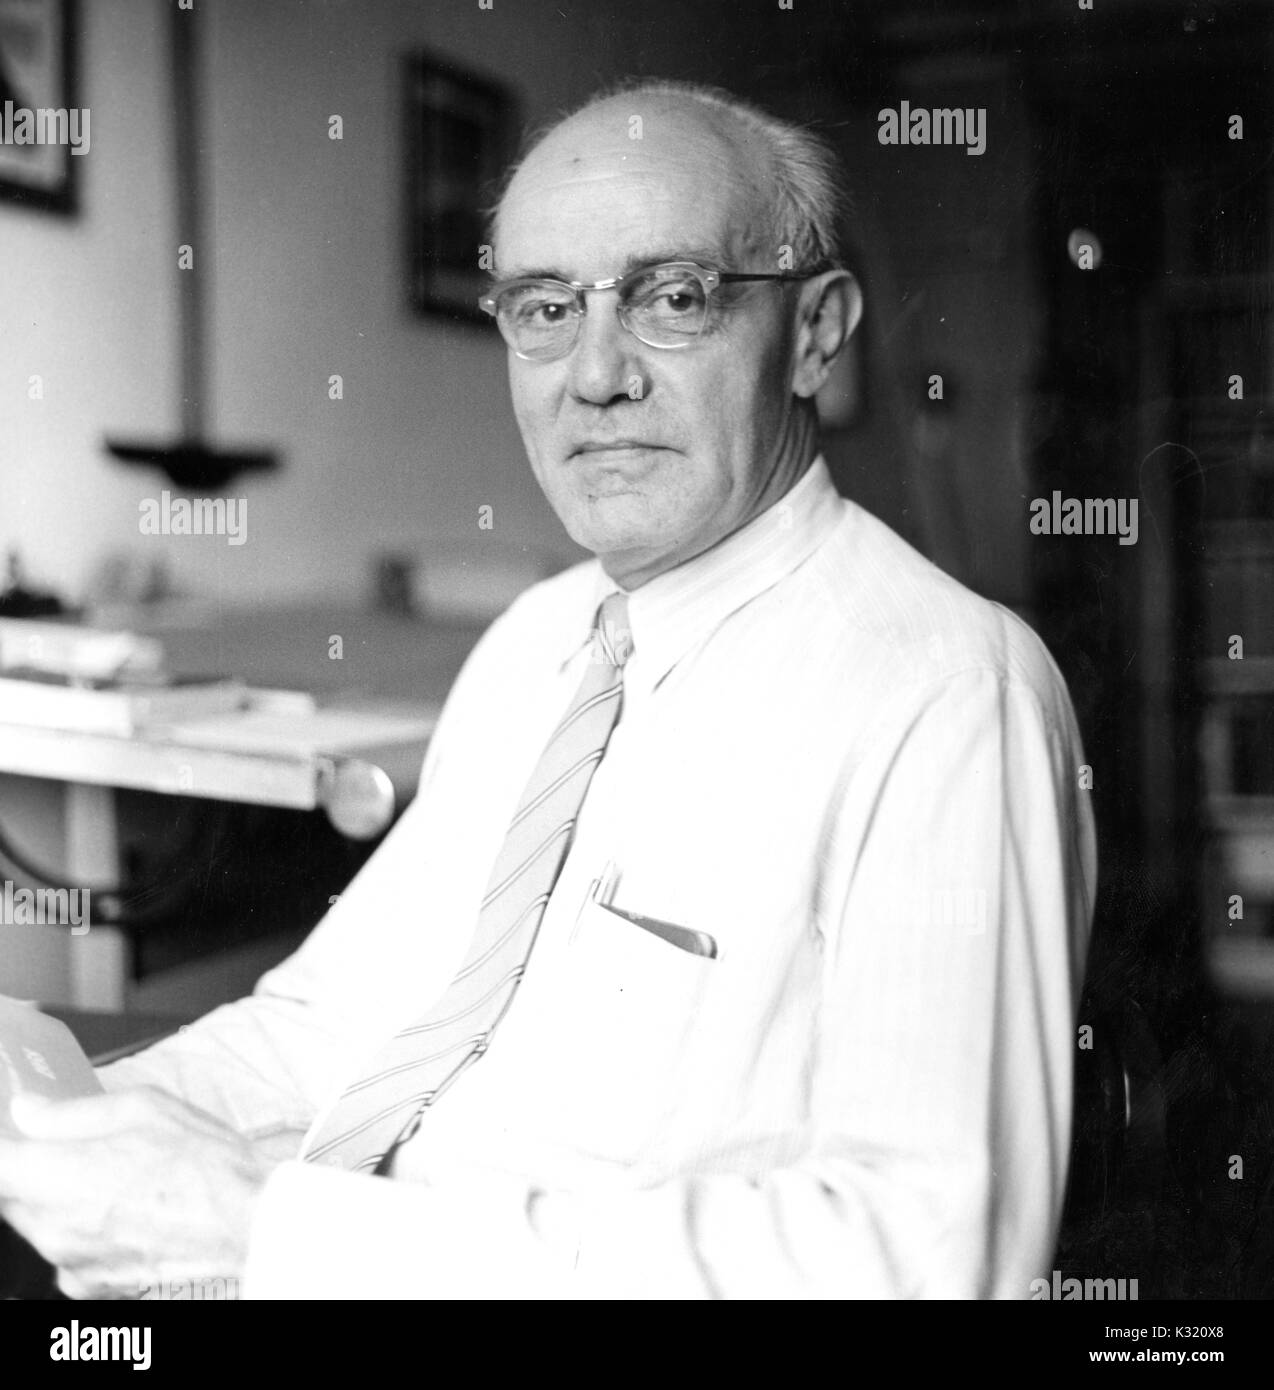 A seated portrait of prominent geologist Ernst Cloos wearing a suit and tie at 60 years of age in his office, 1959. Stock Photo